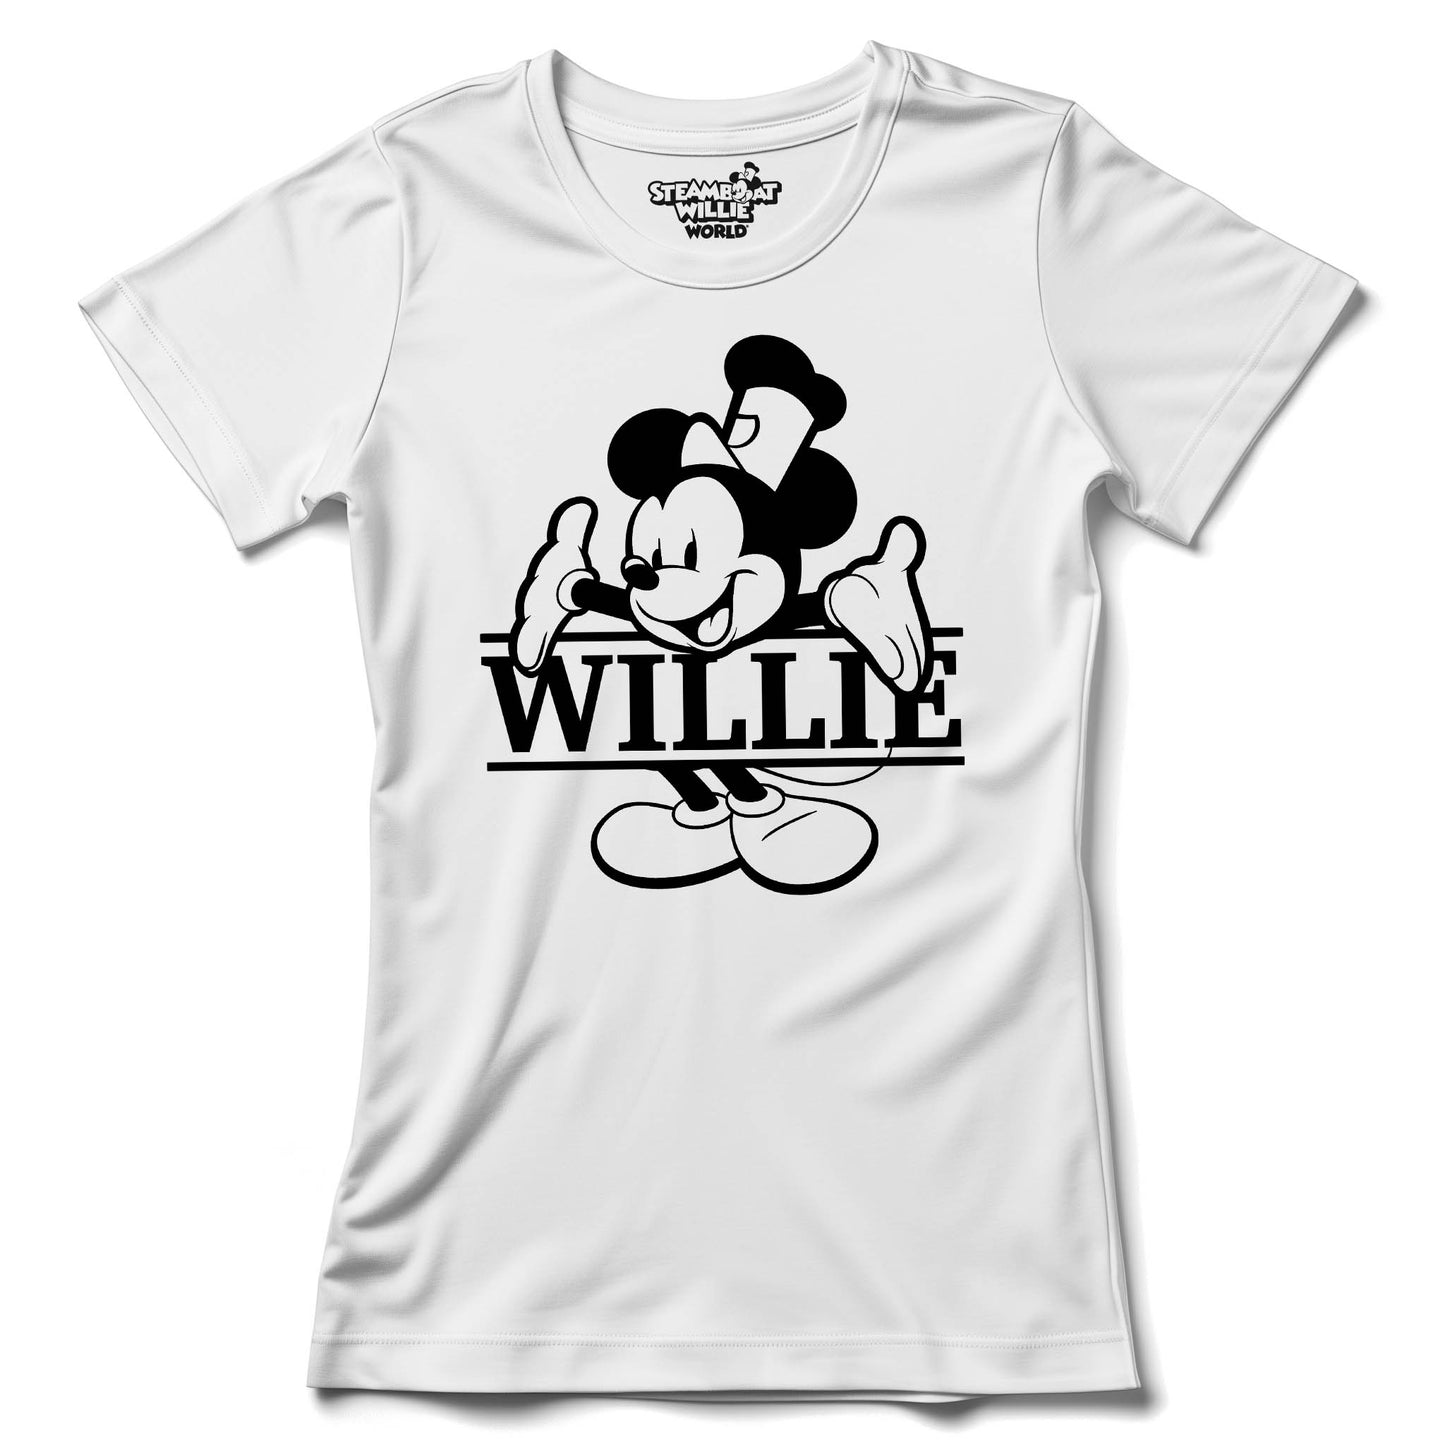 What's My Name? Women's Fitted Tee - Steamboat Willie World